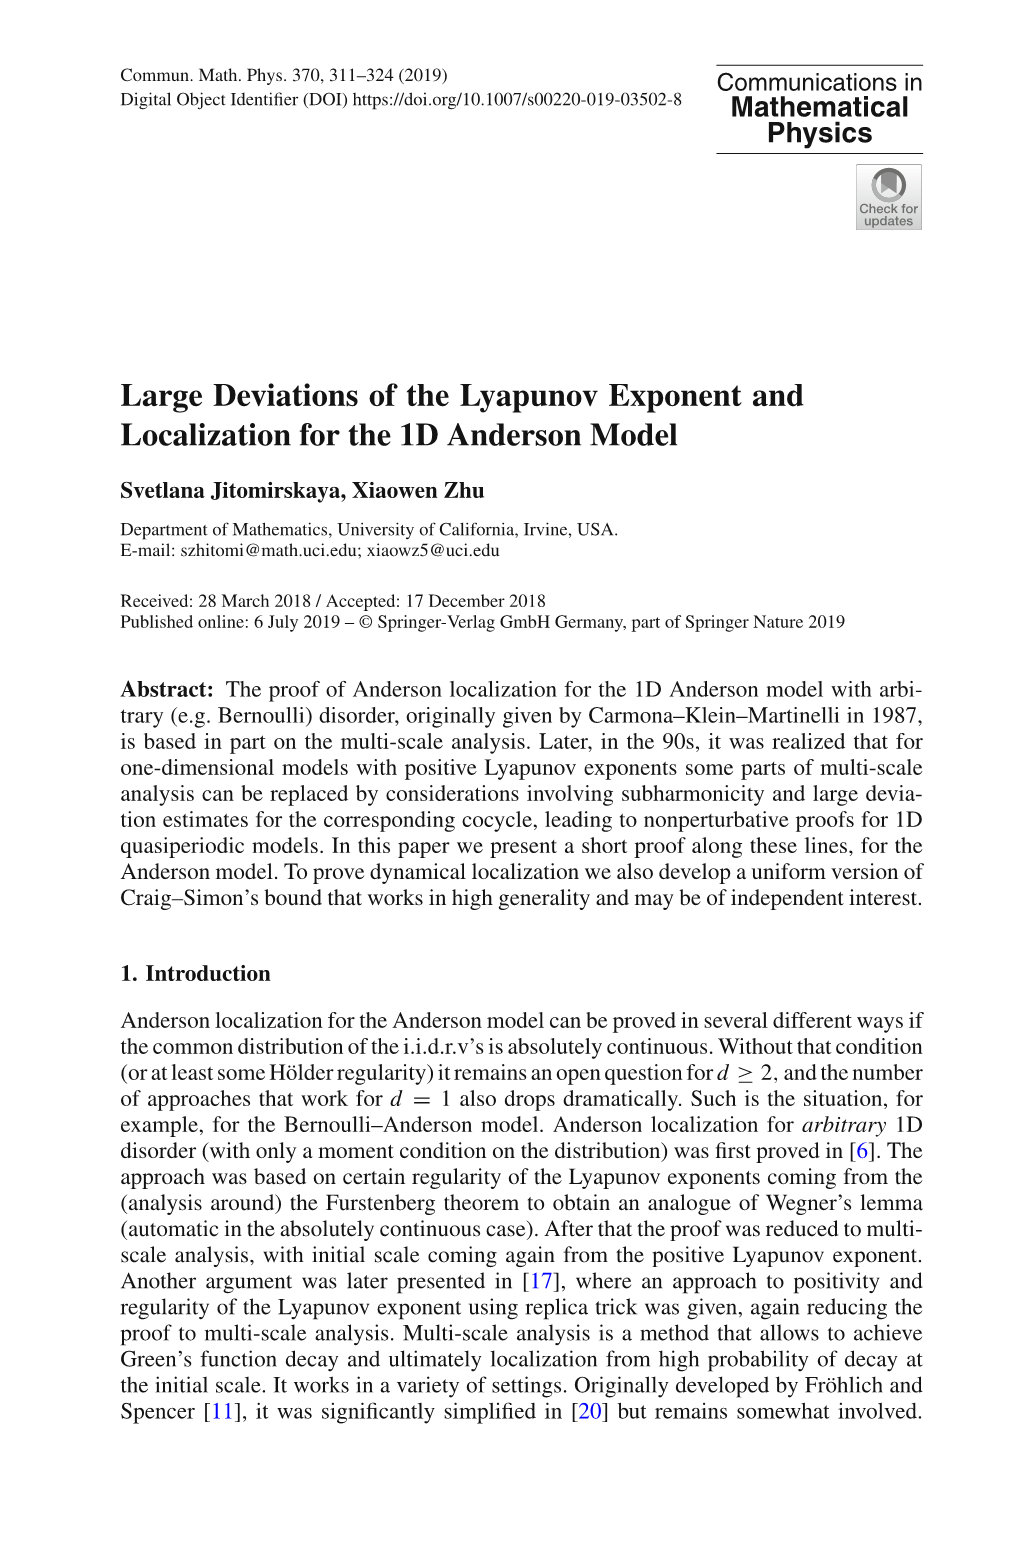 Large Deviations of the Lyapunov Exponent and Localization for the 1D Anderson Model